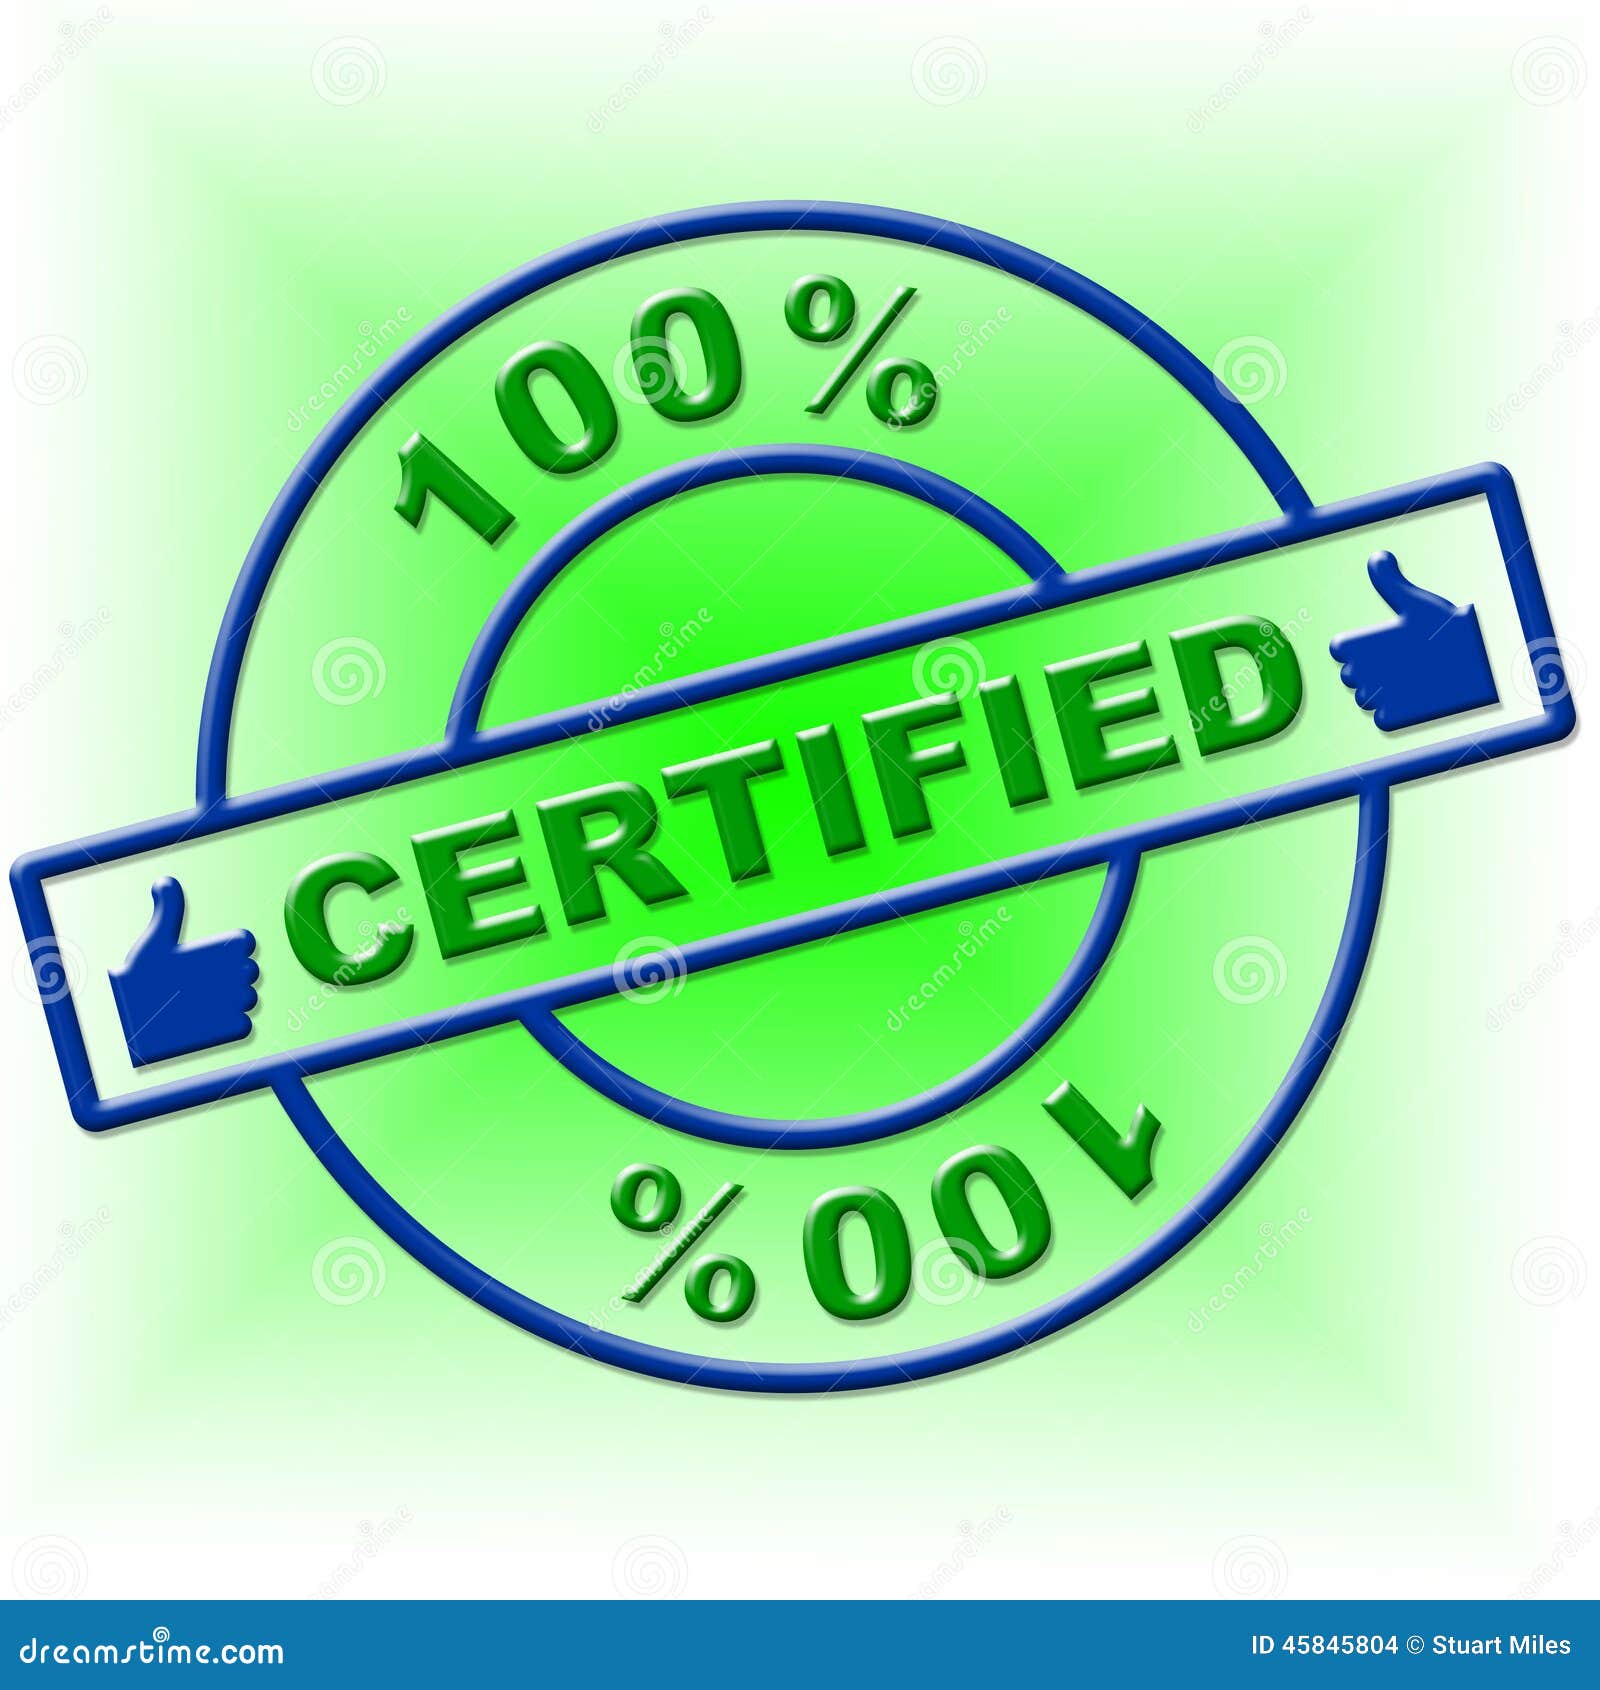 hundred percent certified means endorse ratified and confirm